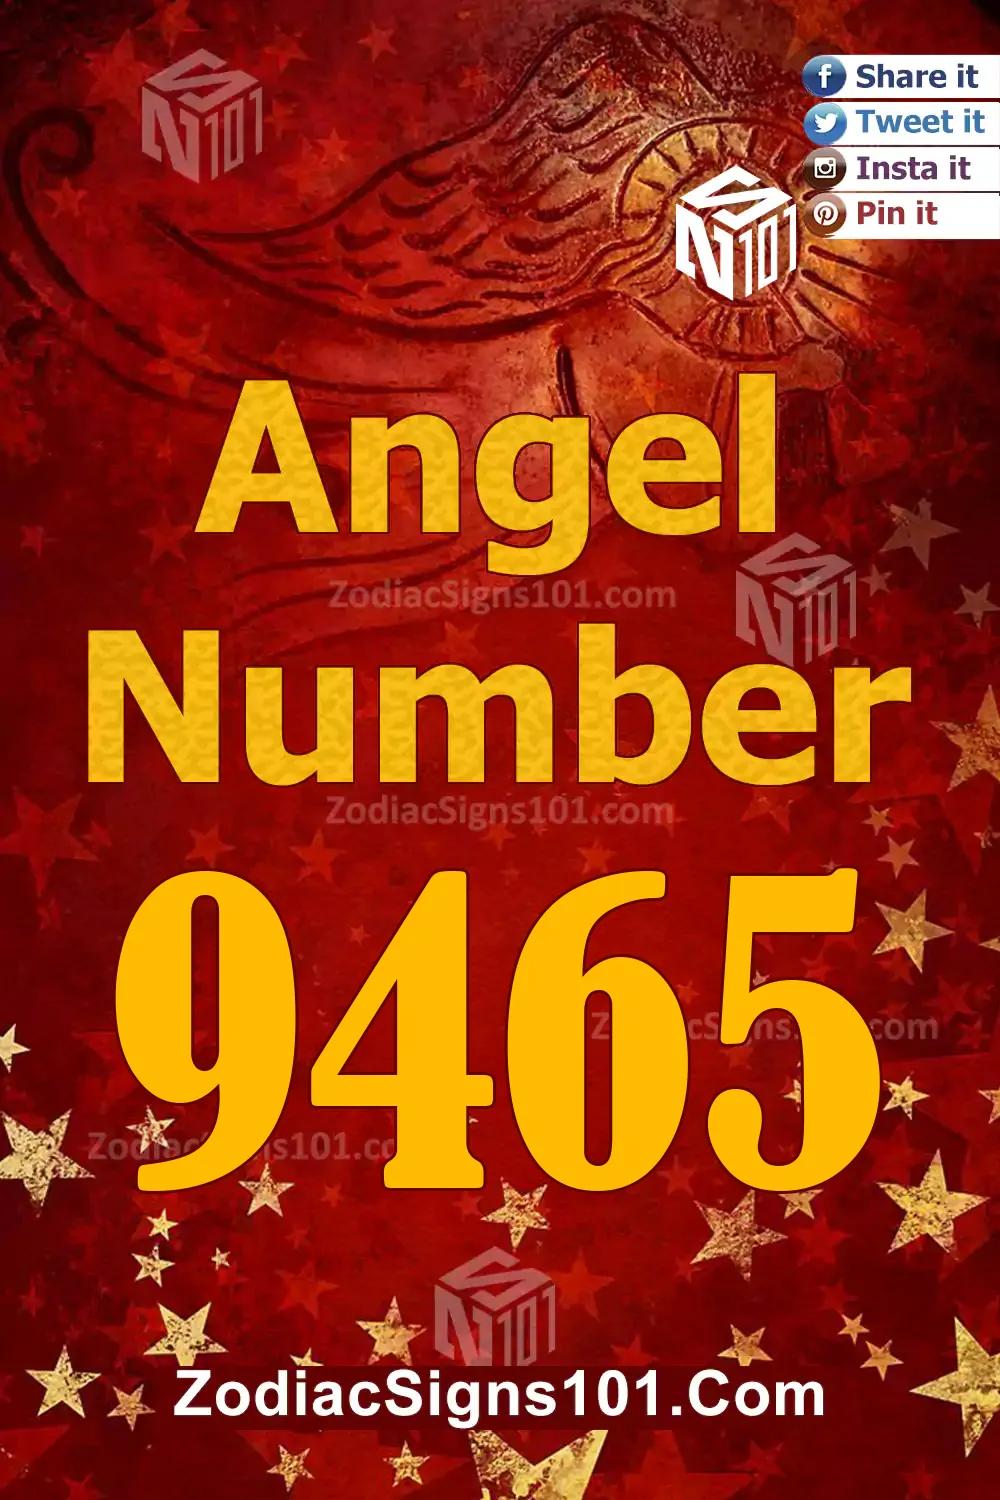 9465 Angel Number Meaning